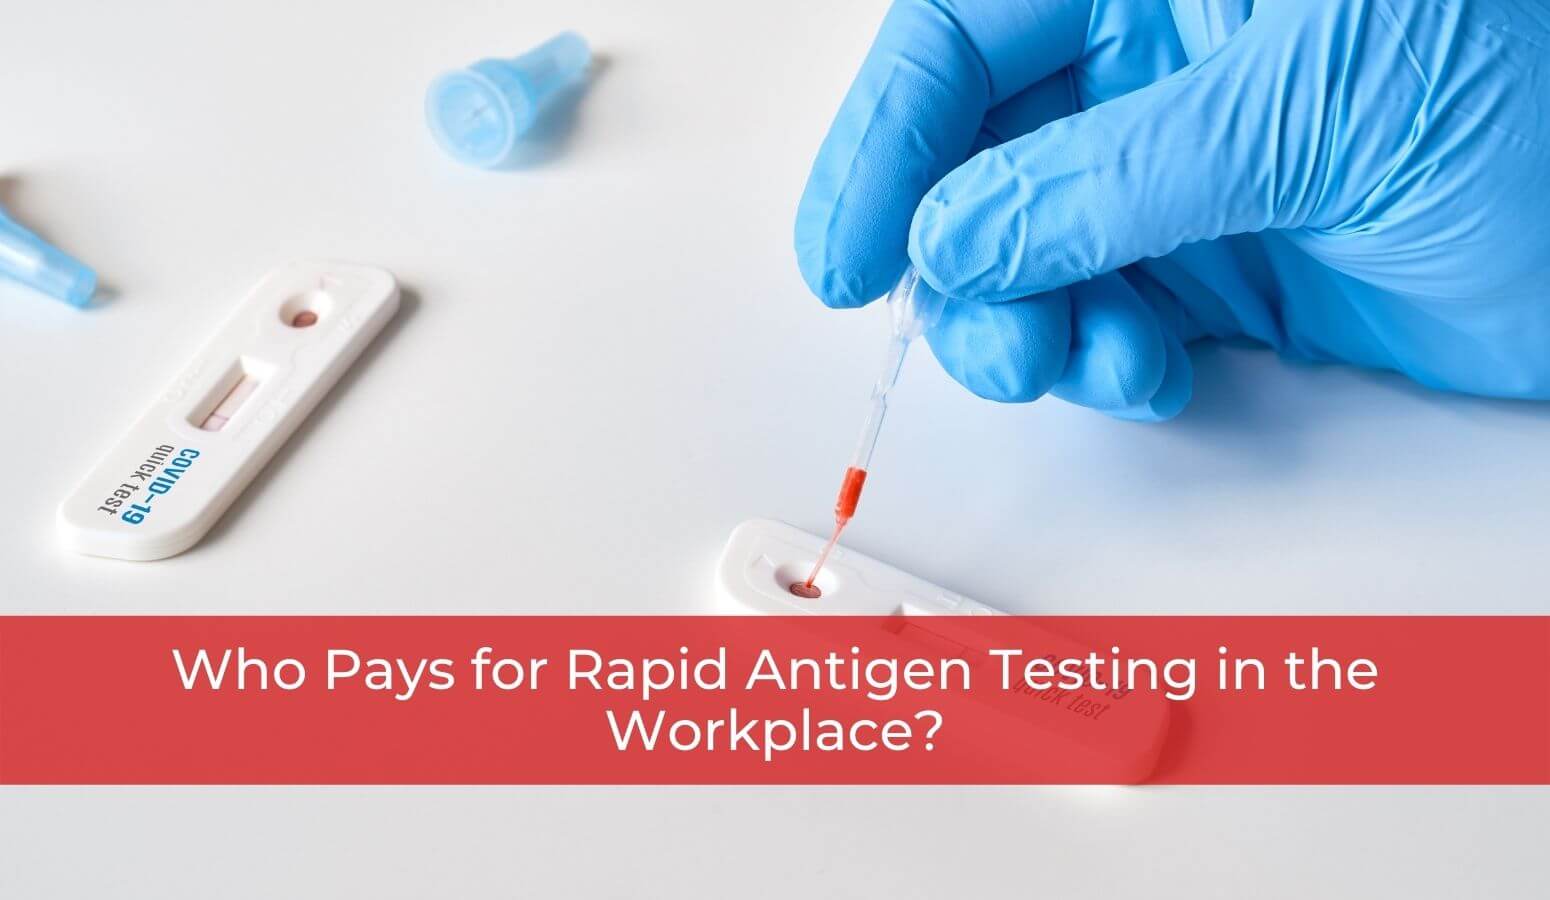 Featured image for “Who Pays for Rapid Antigen Testing in the Workplace?”